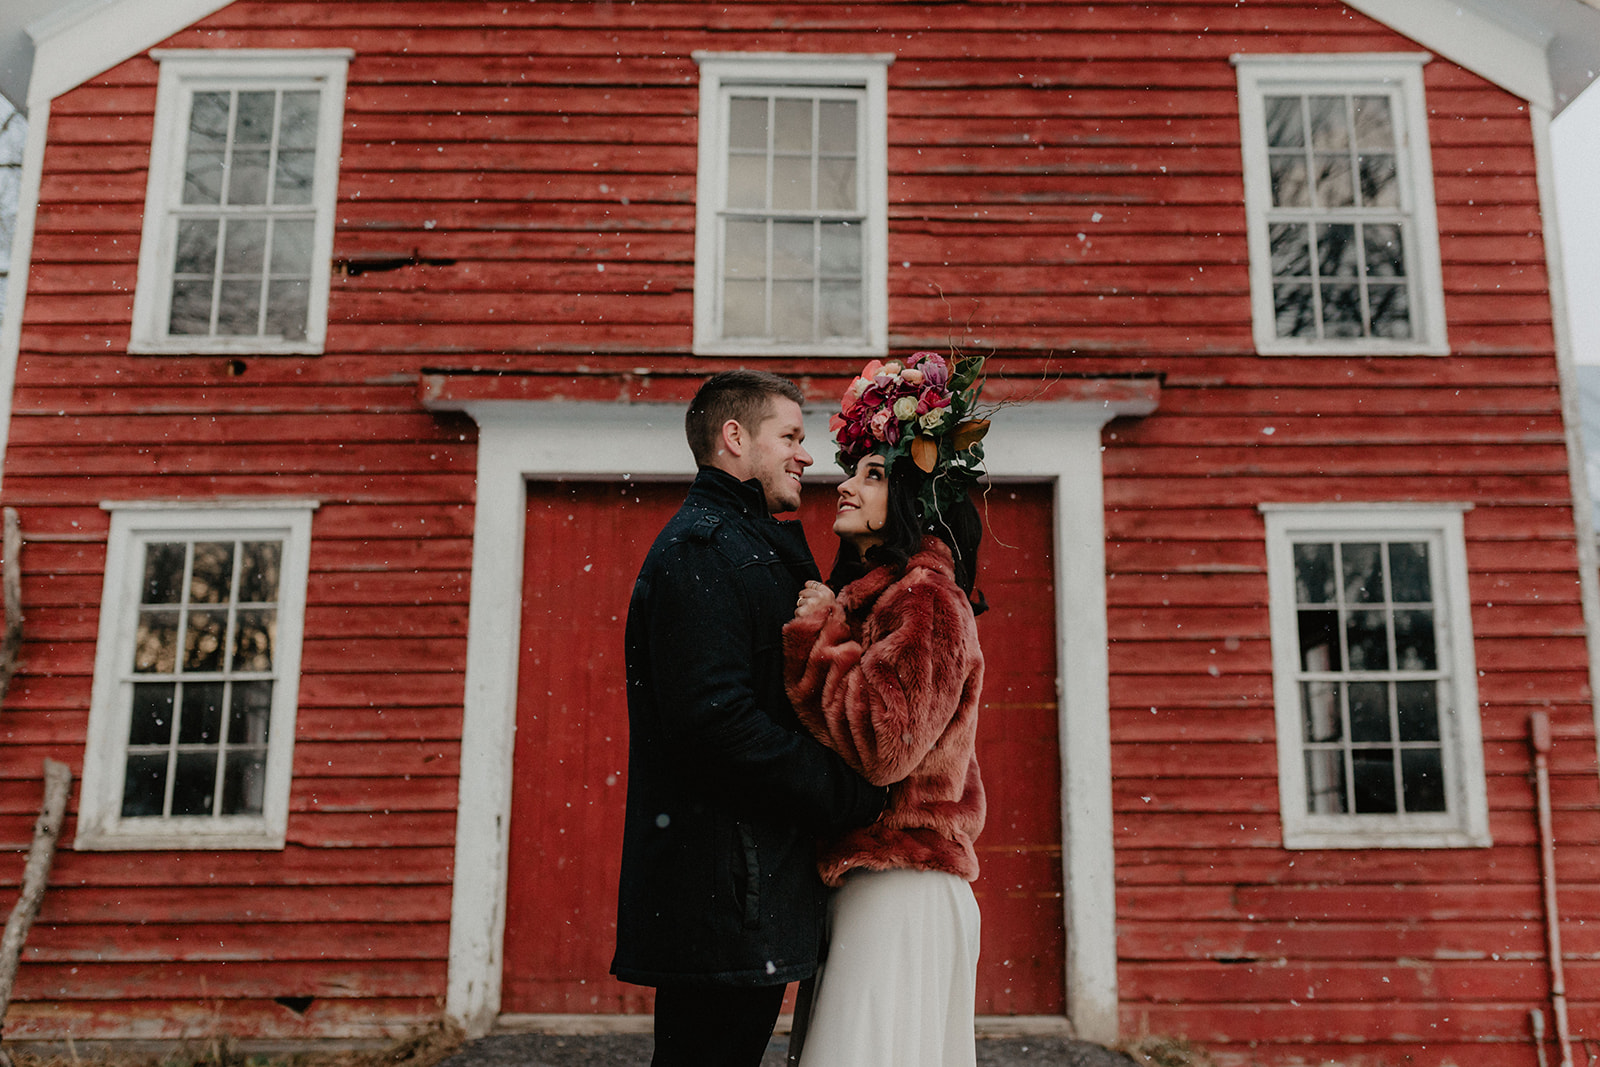 The 10 Most Intriguing Wedding Venues in Upstate New York 2020 | The Maples Estate | Verve Event Co.